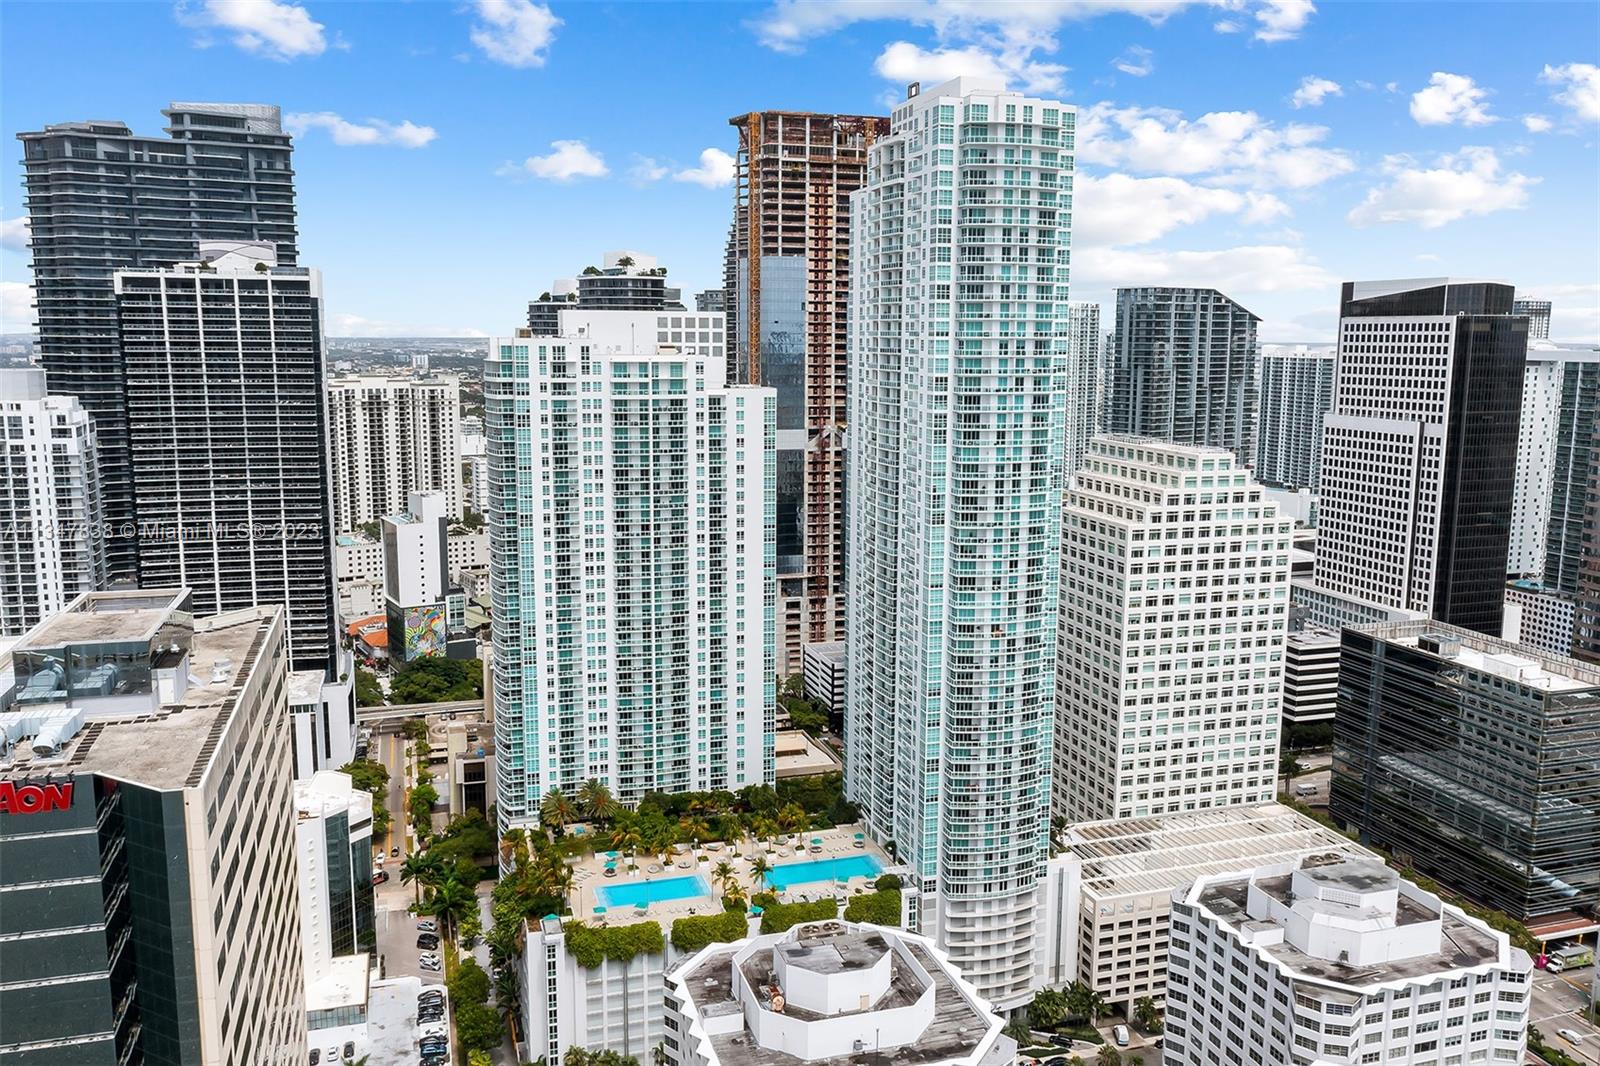 The Plaza on Brickell South image #49